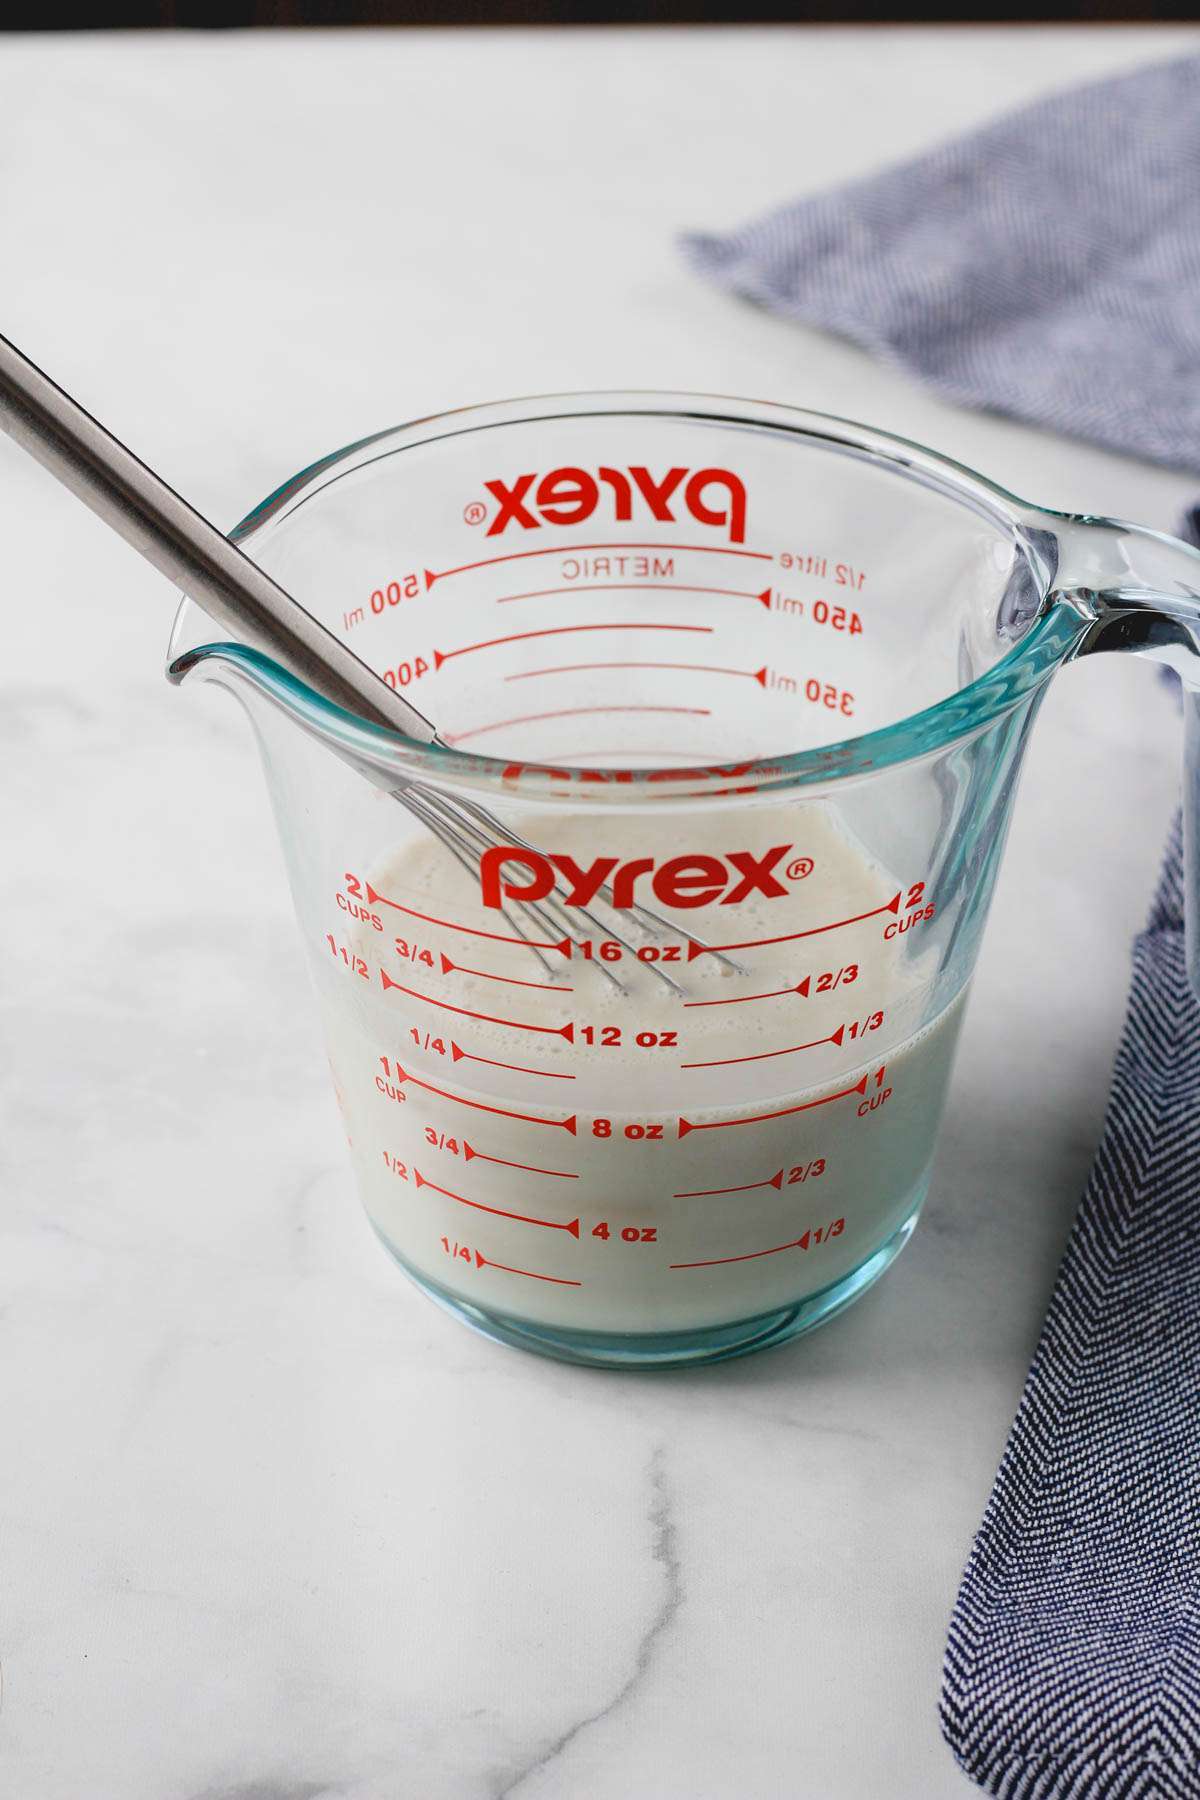 Pyrex 4 cup Measuring Cup - Whisk